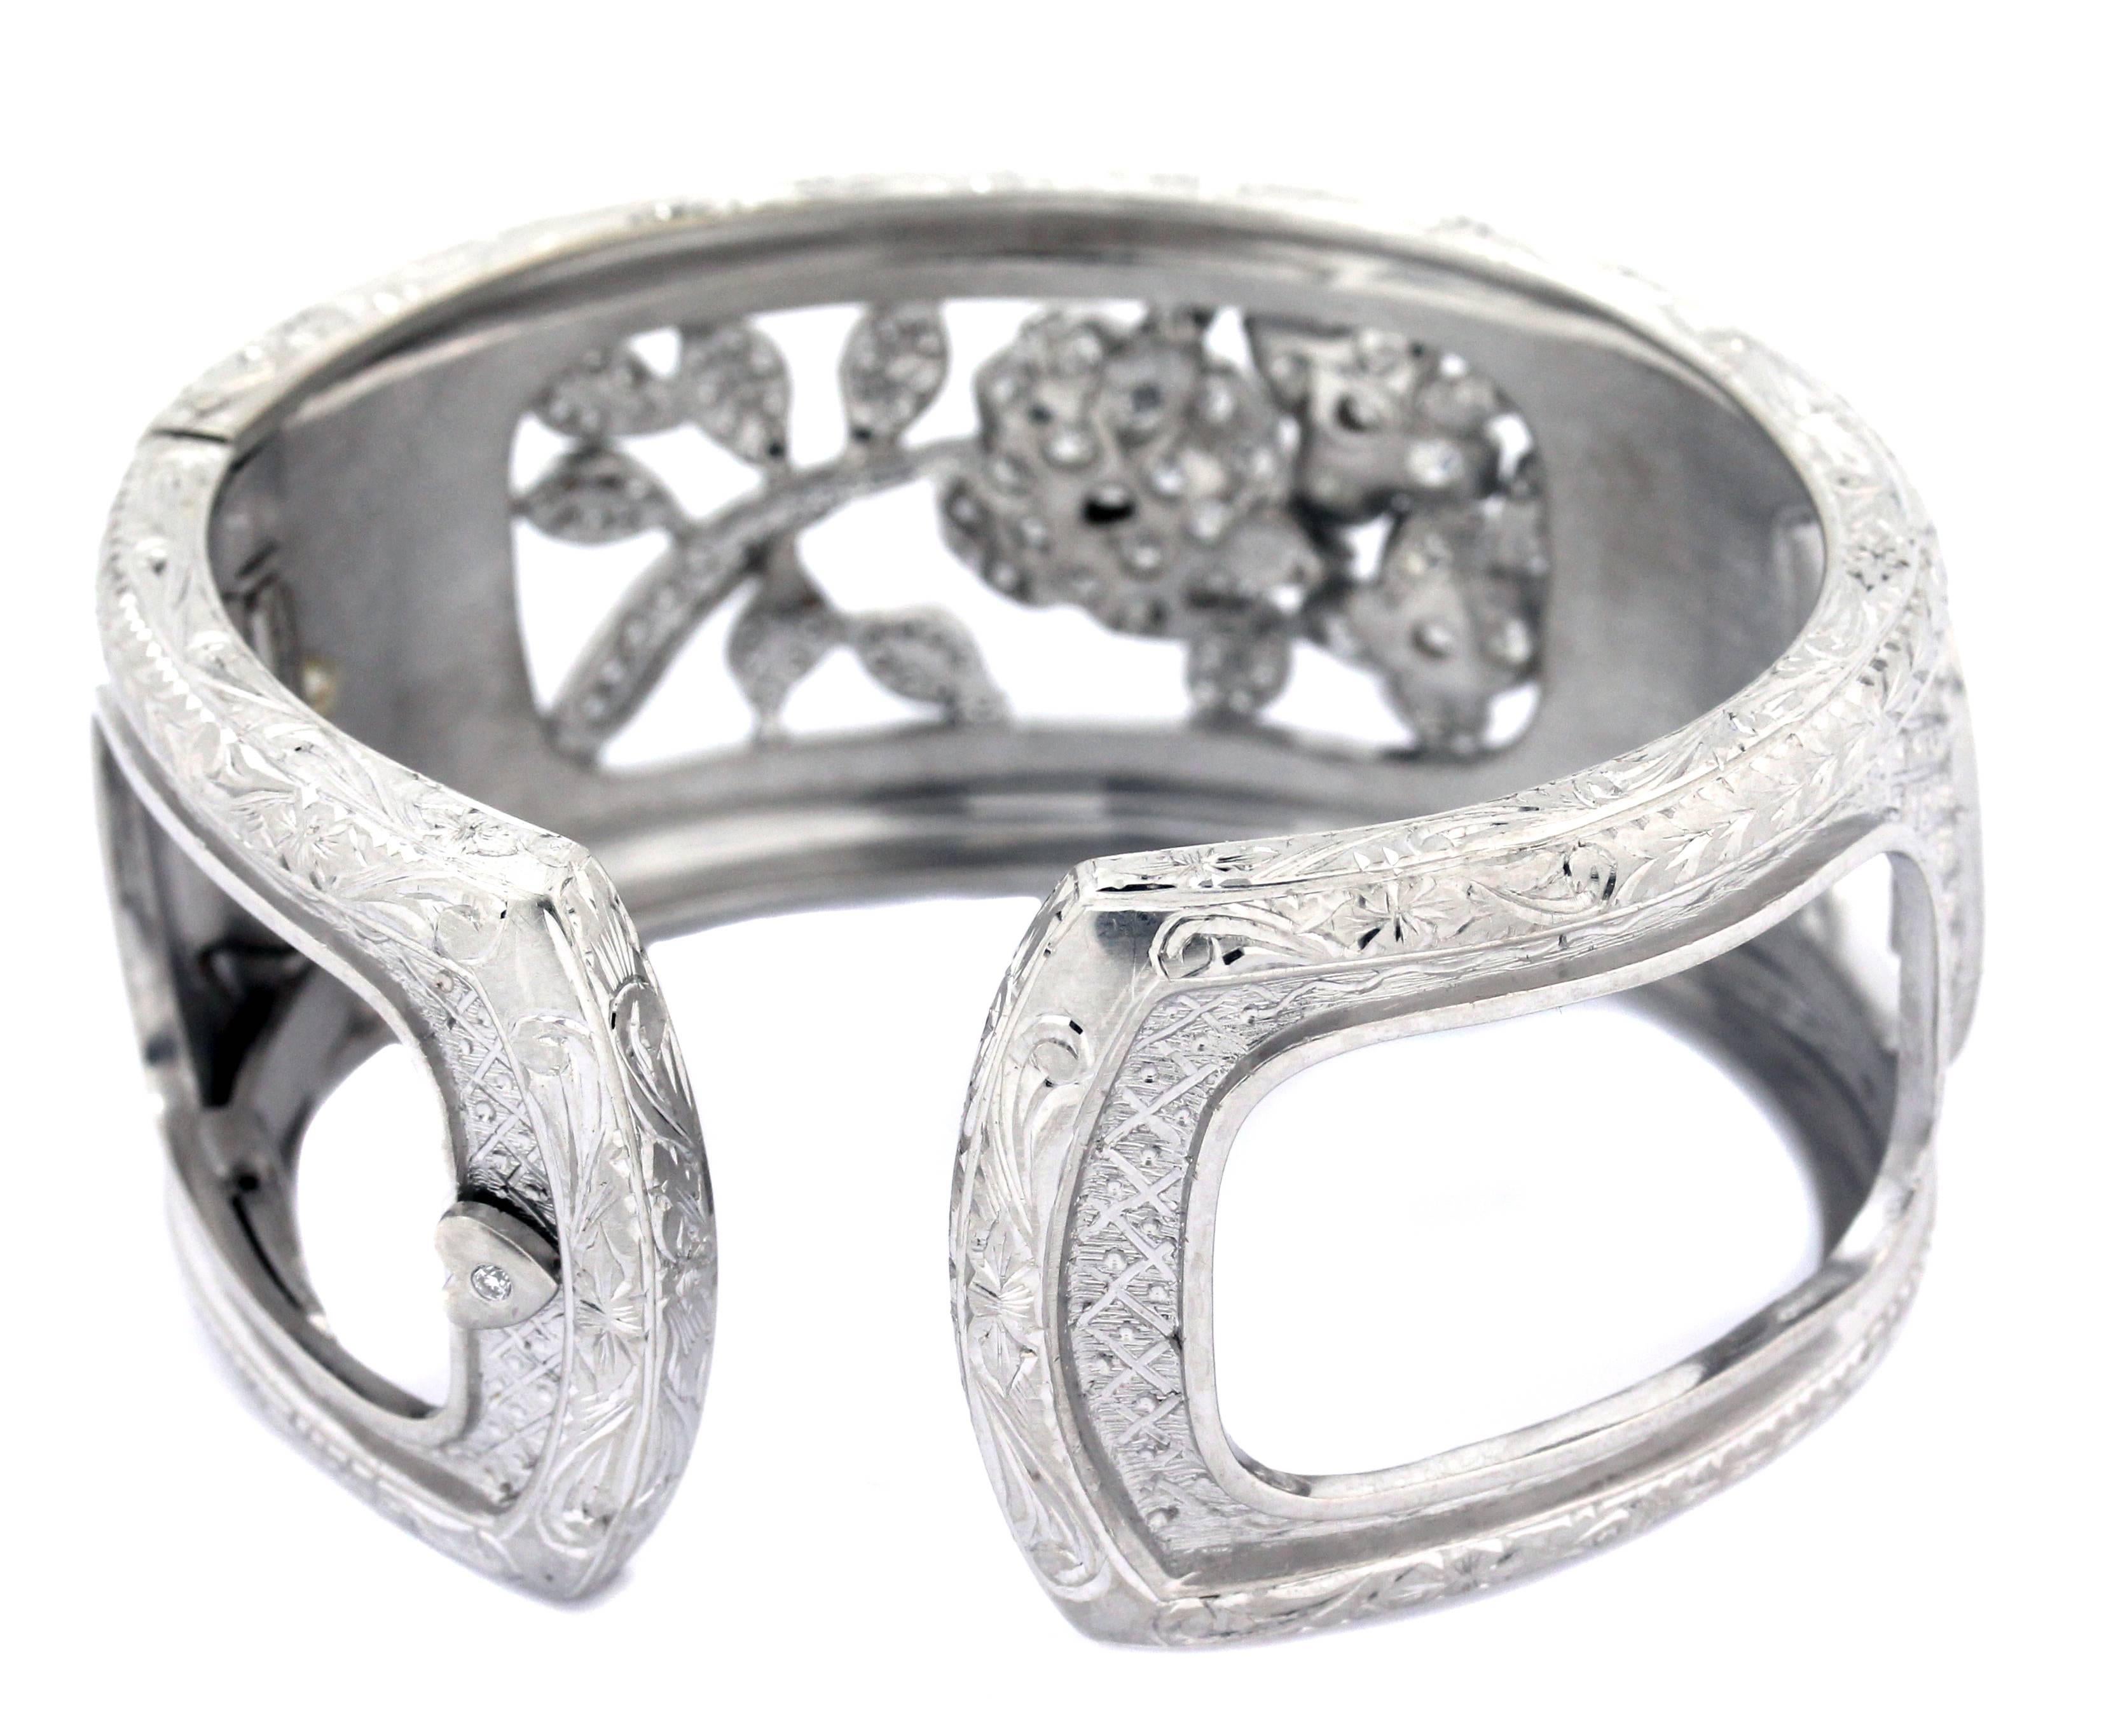 Estate 18K White Gold and Diamond Hand Engraved Floral Cuff Bracelet by Stambolian

This is the only one of its kind. Truly a work of art. The cuff is entirely hand made. The engravings on the face of the ring are all done by hand. 

The bracelet